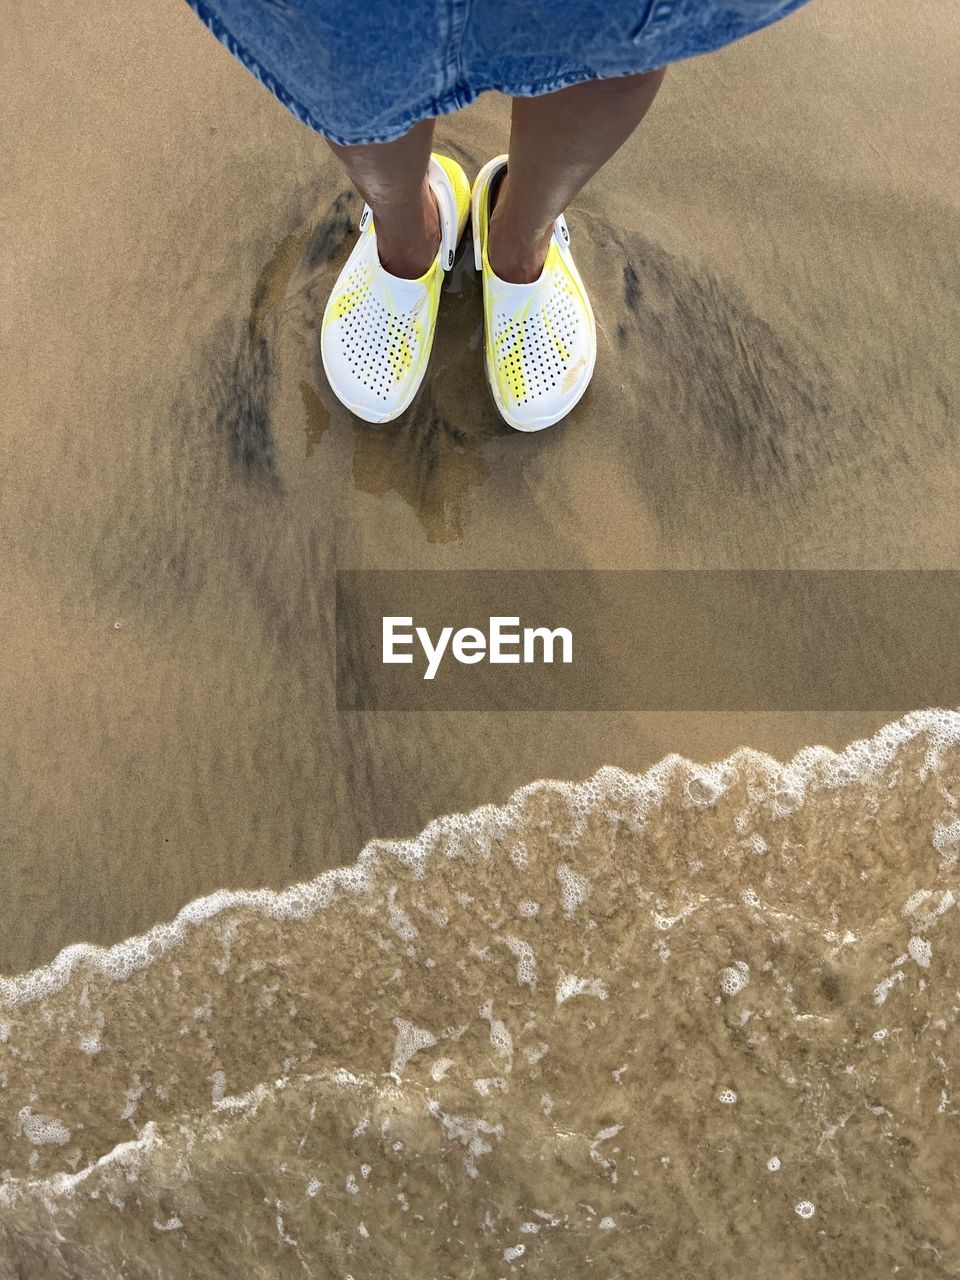 beach, sand, blue, land, low section, human leg, shoe, water, one person, high angle view, leisure activity, lifestyles, nature, footwear, day, sea, casual clothing, sports, jeans, surfing, motion, limb, vacation, trip, outdoors, standing, adult, human limb, yellow, water sports, holiday, men, white, human foot, women, sunlight, personal perspective, clothing, relaxation, wave